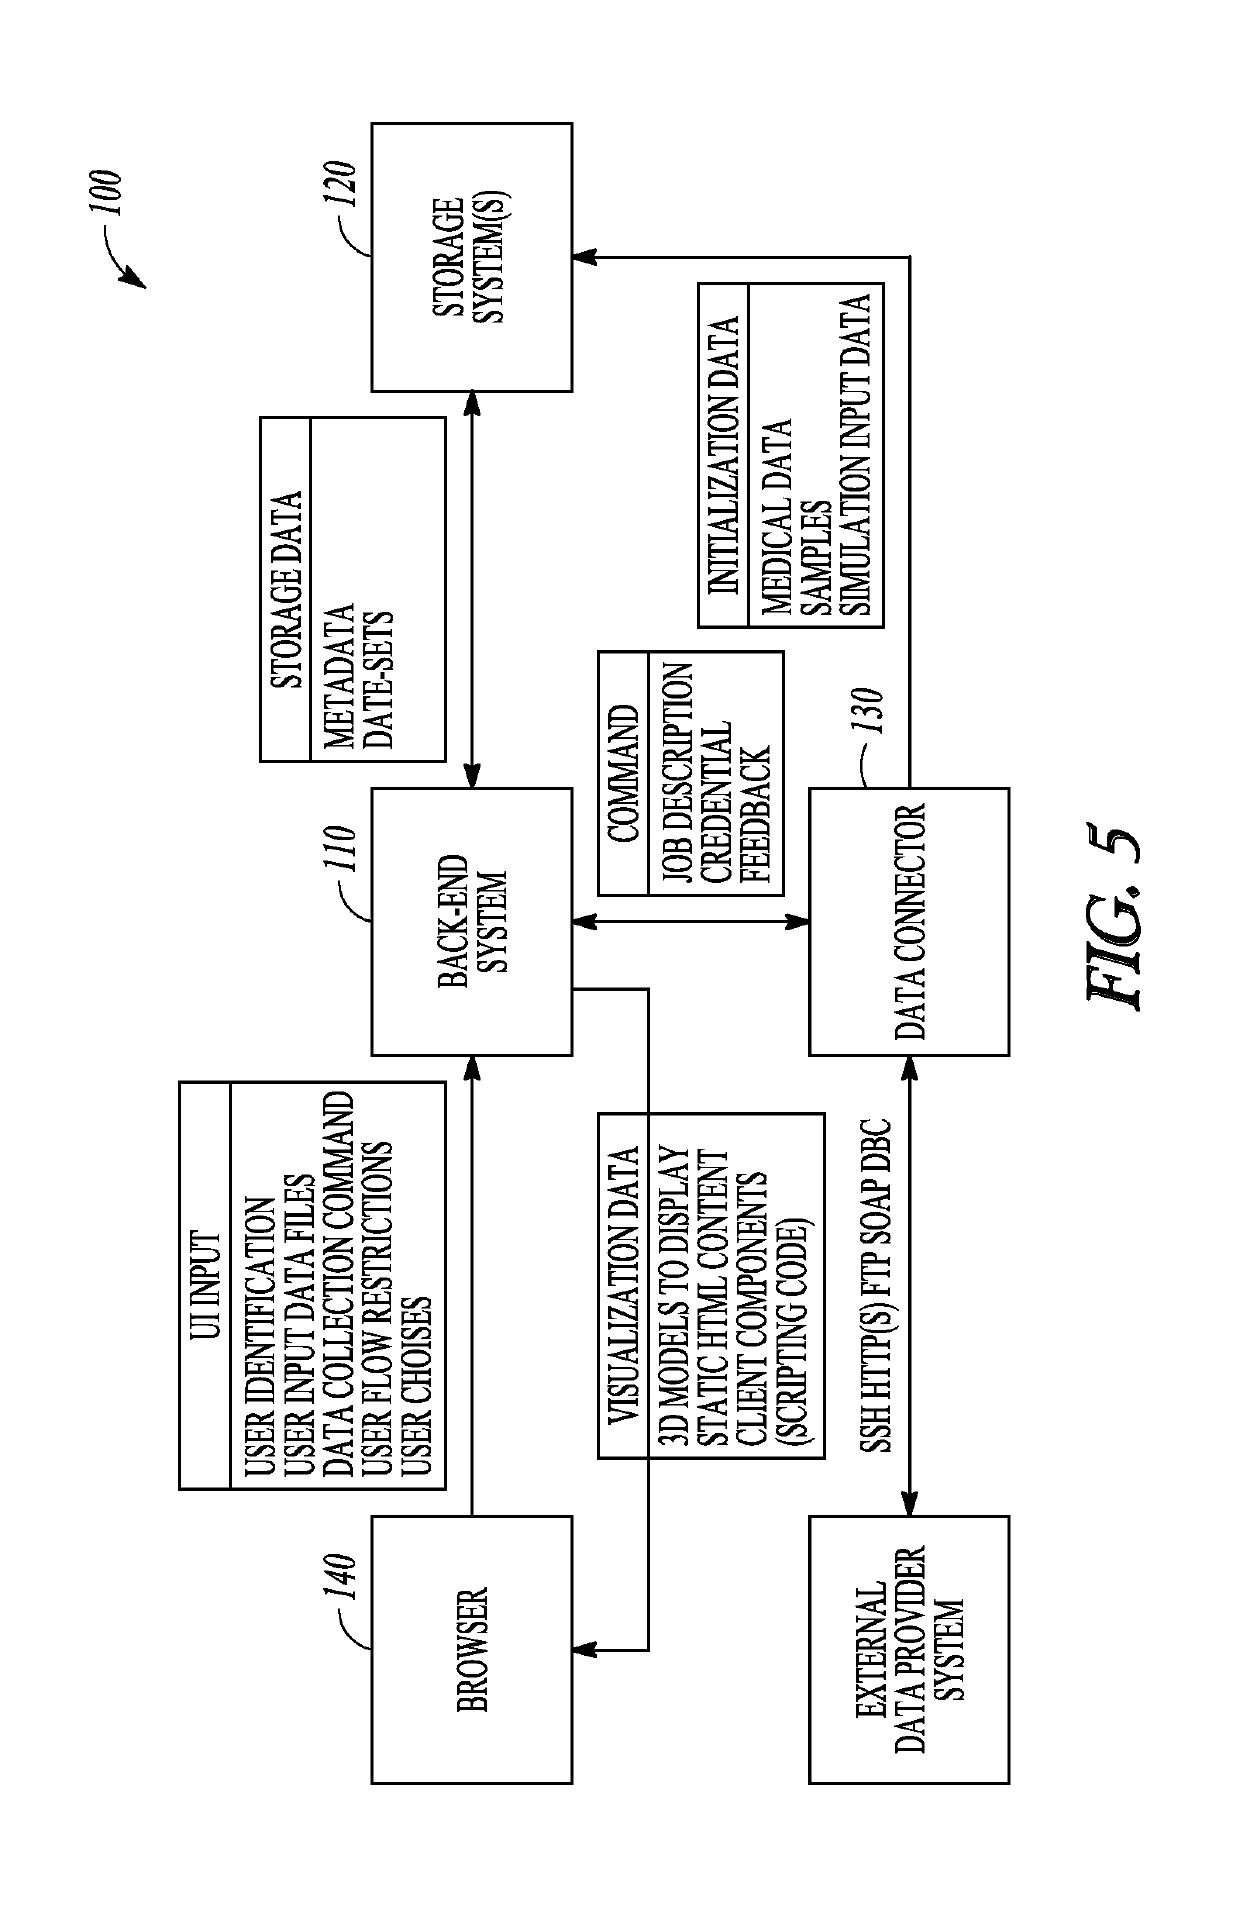 Method and computing system for modelling a primate brain